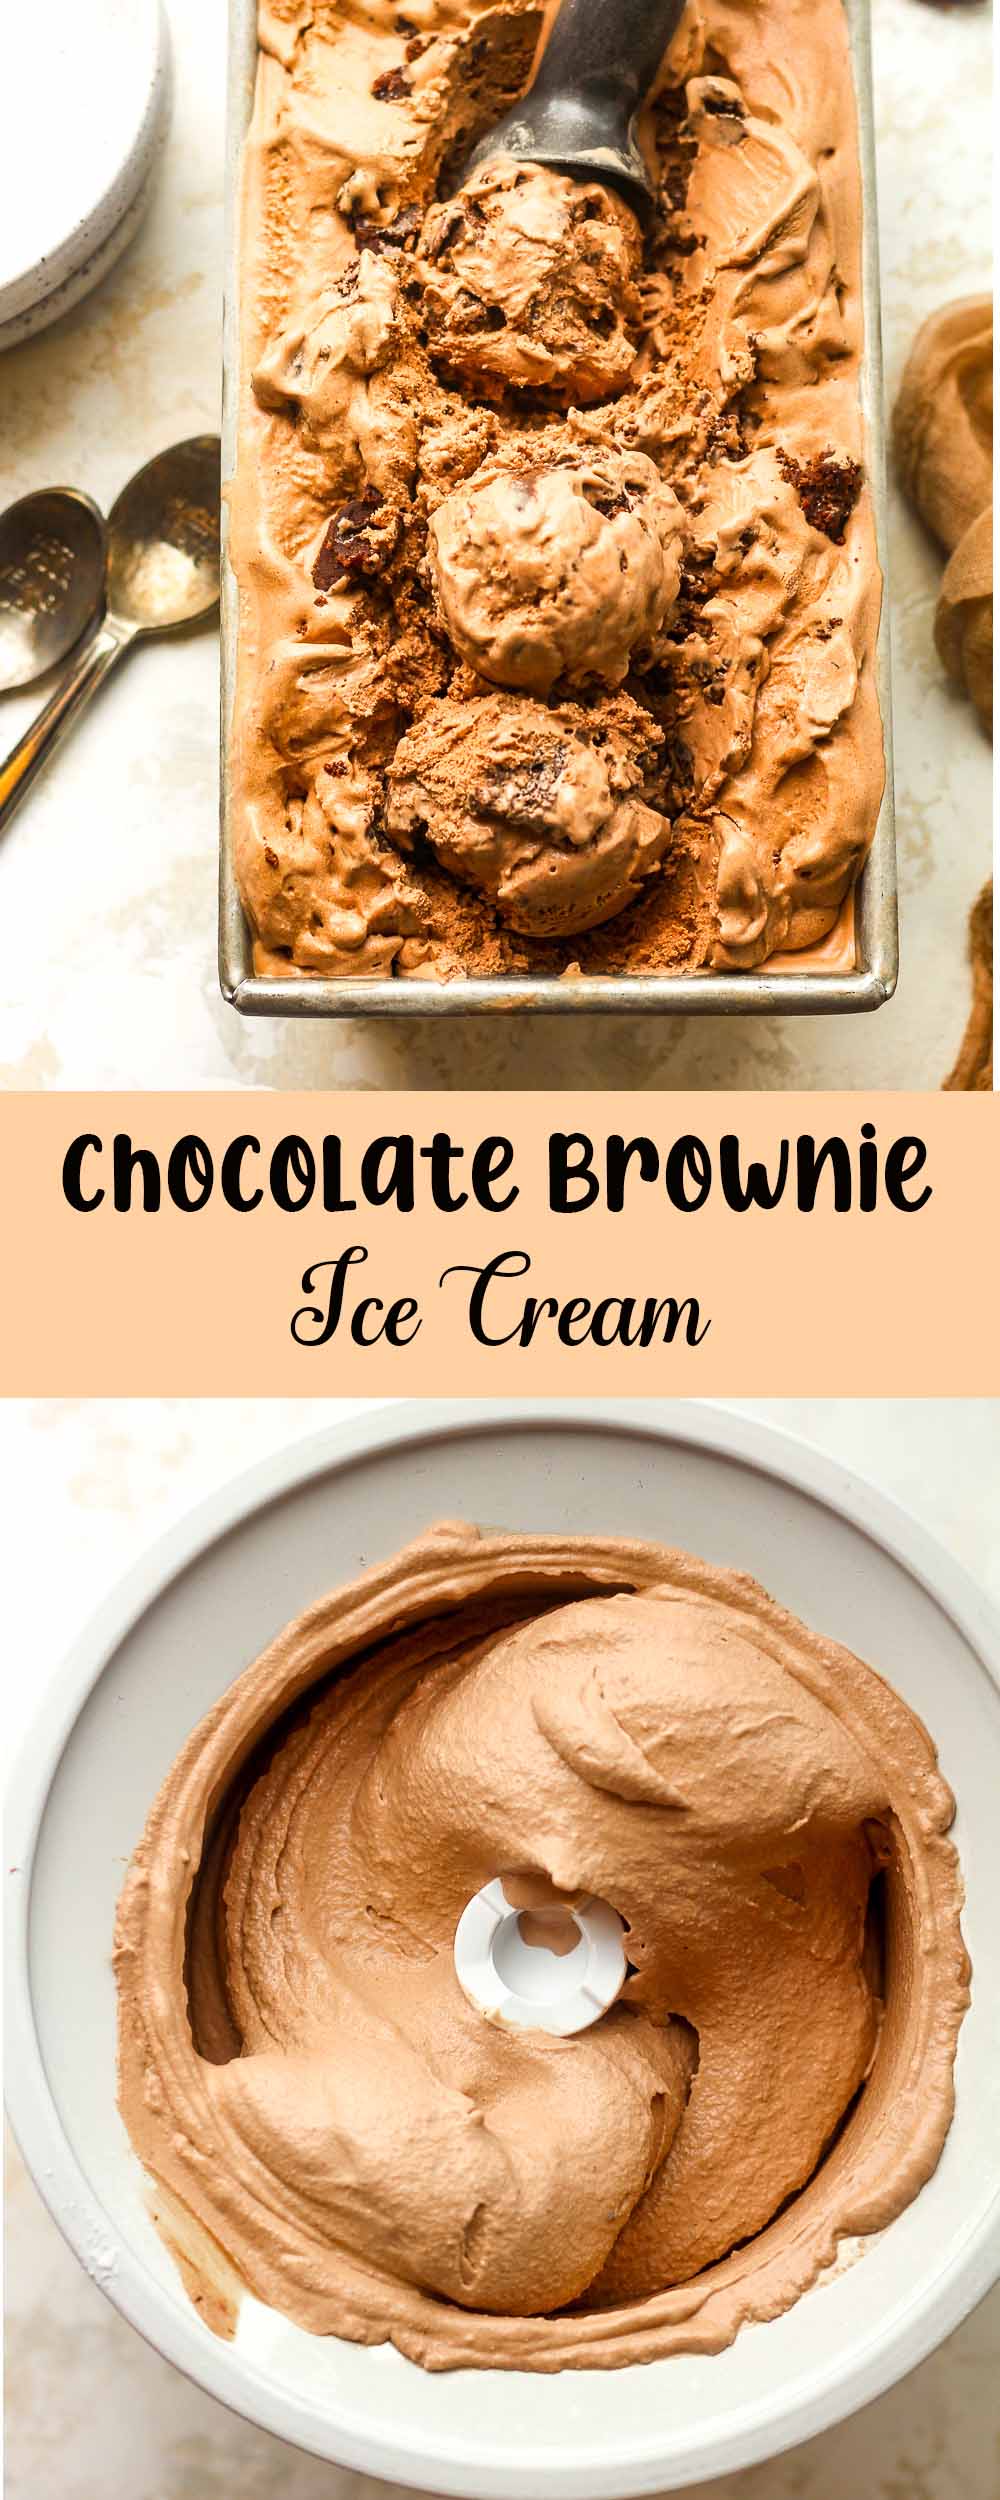 A collage of chocolate brownie ice cream photos.